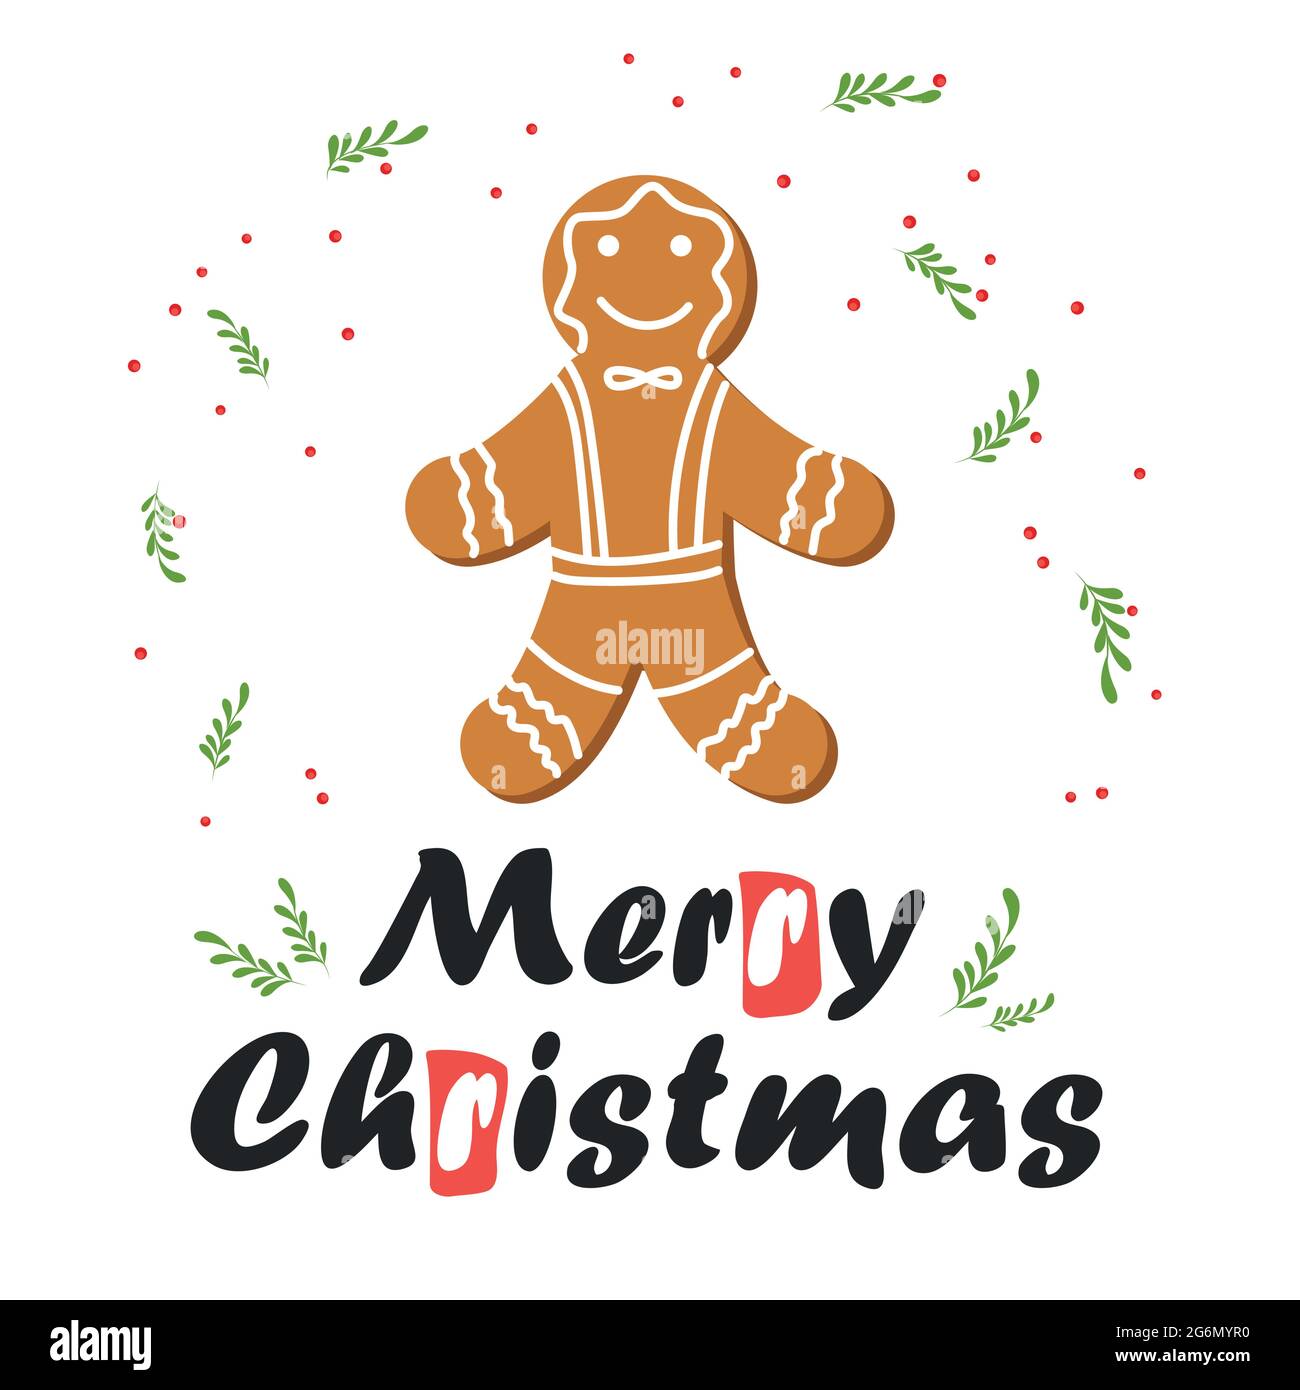 Christmas and New Year's minimal simple postcard with gingerbread man and greeting text. Stock Vector